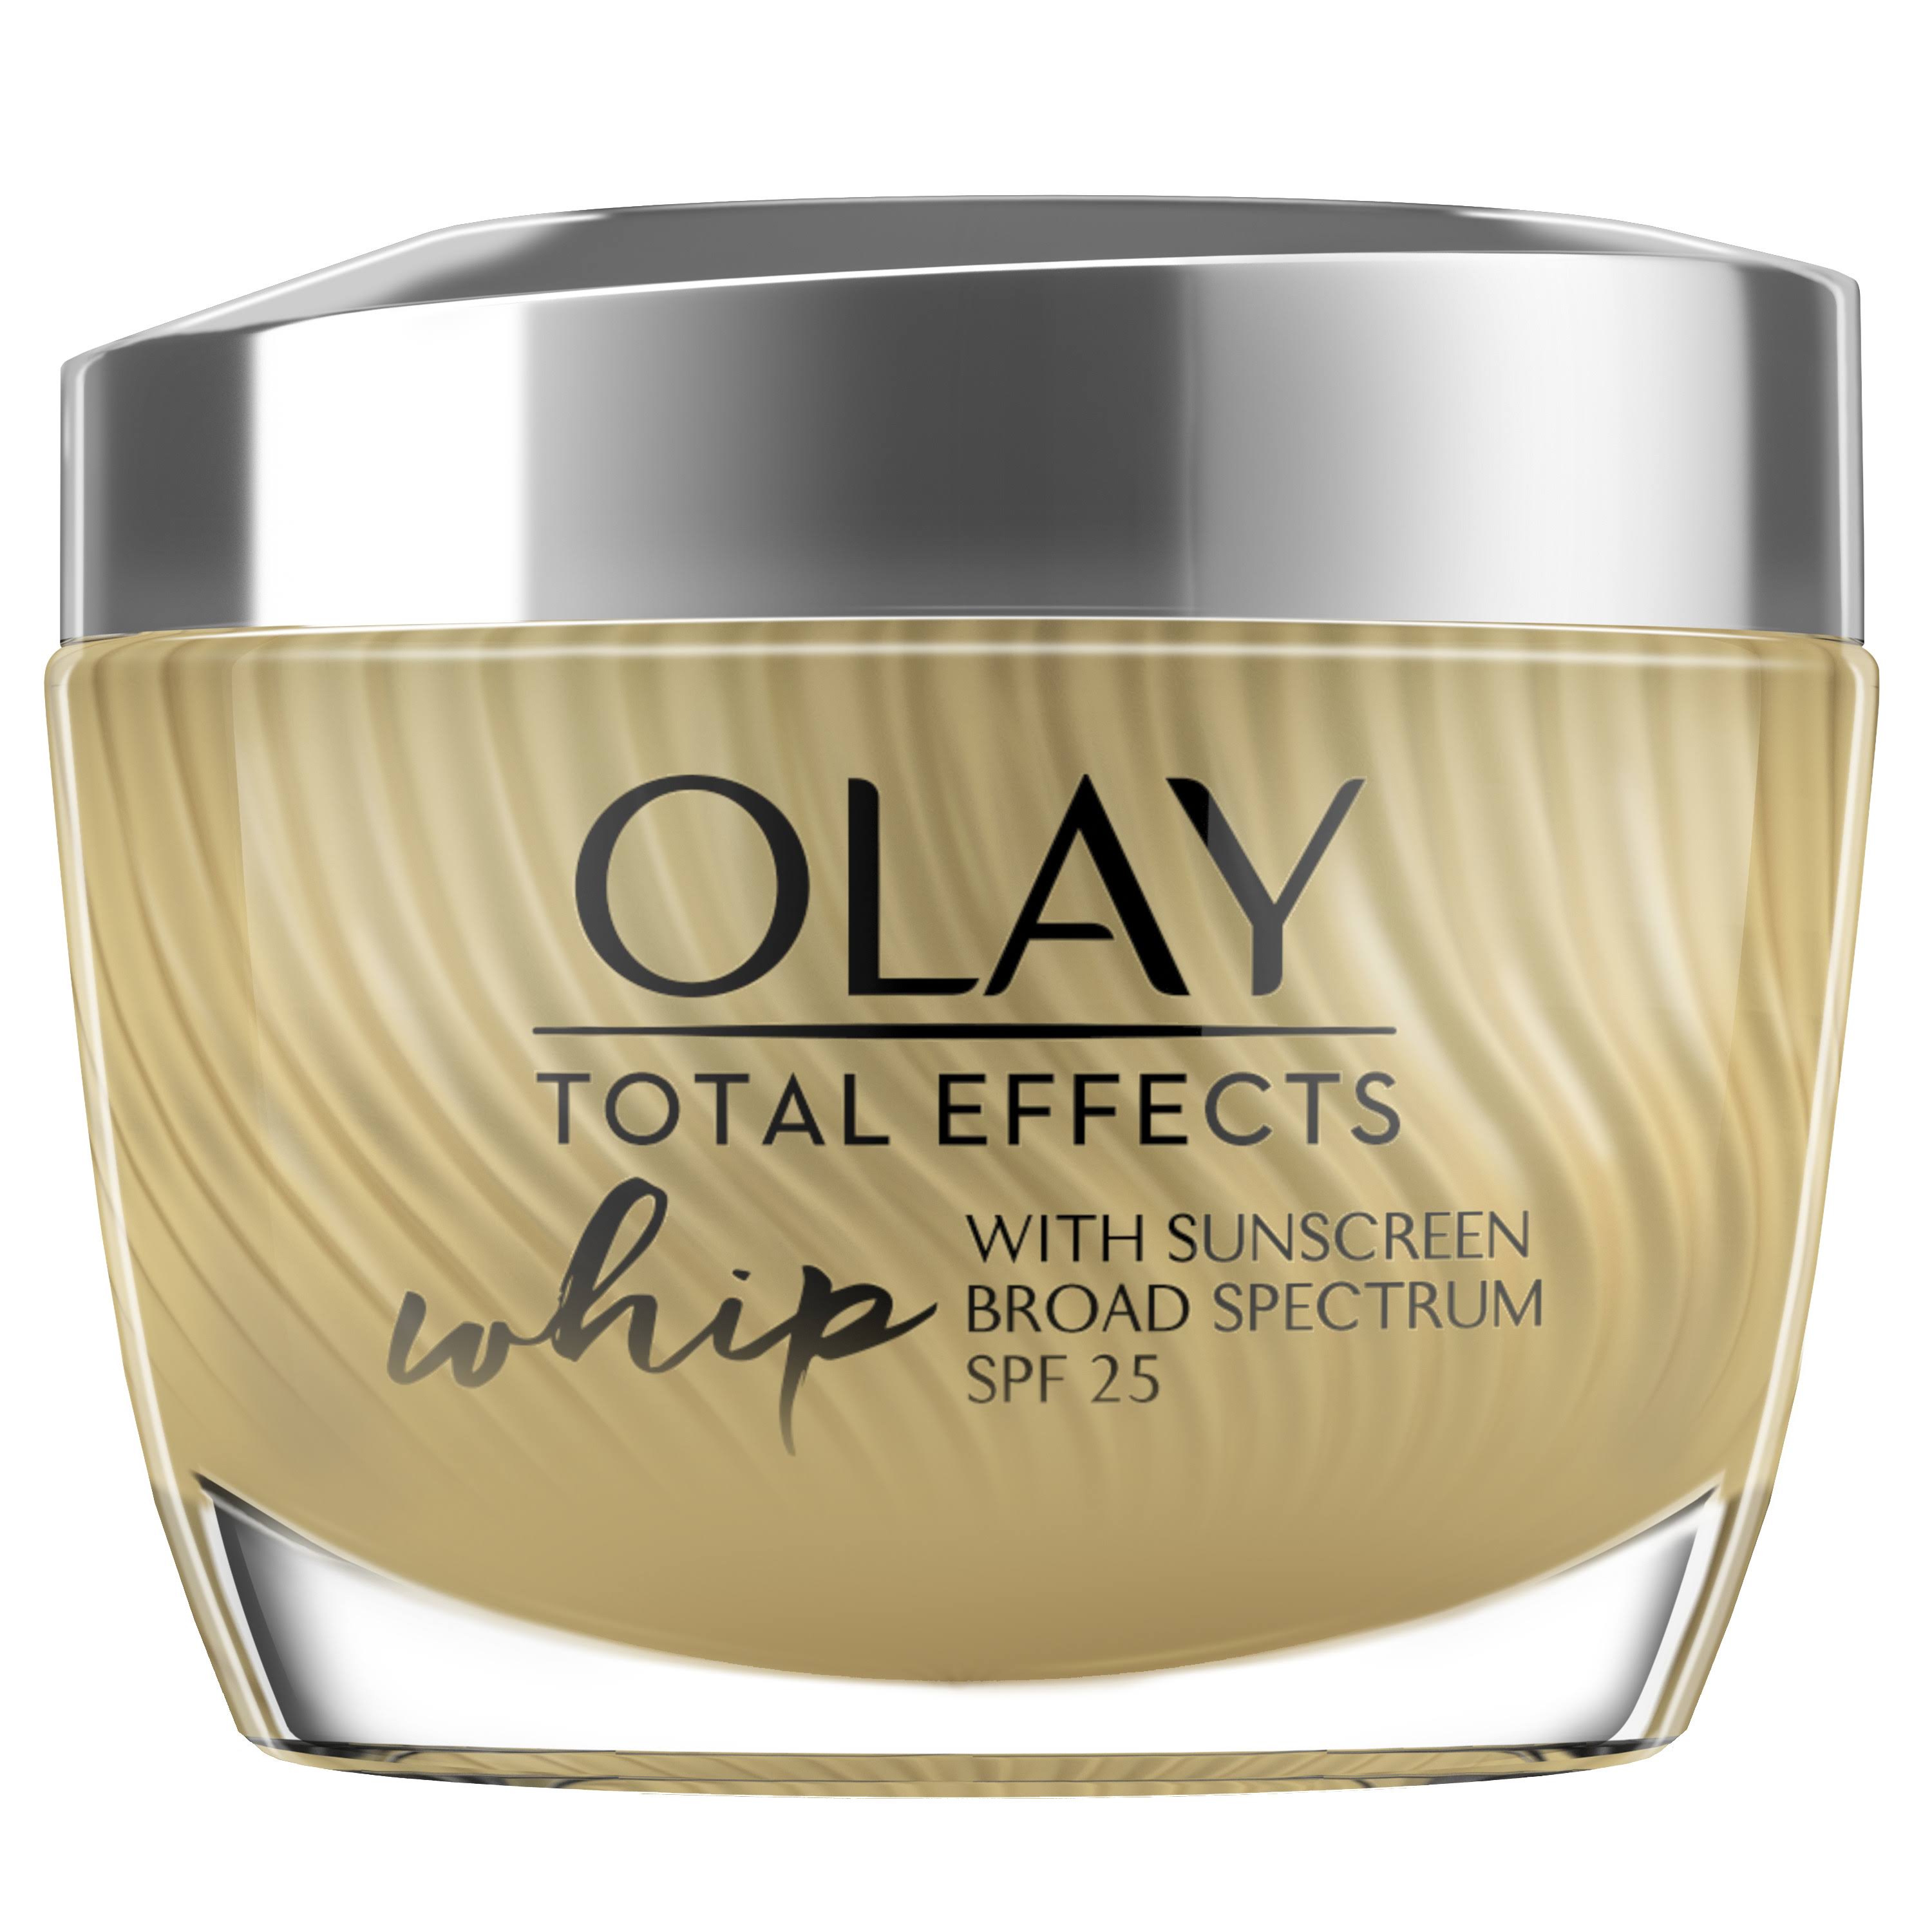 Olay Total Effects Whip Active Moisturizer - SPF 25, 1.7oz